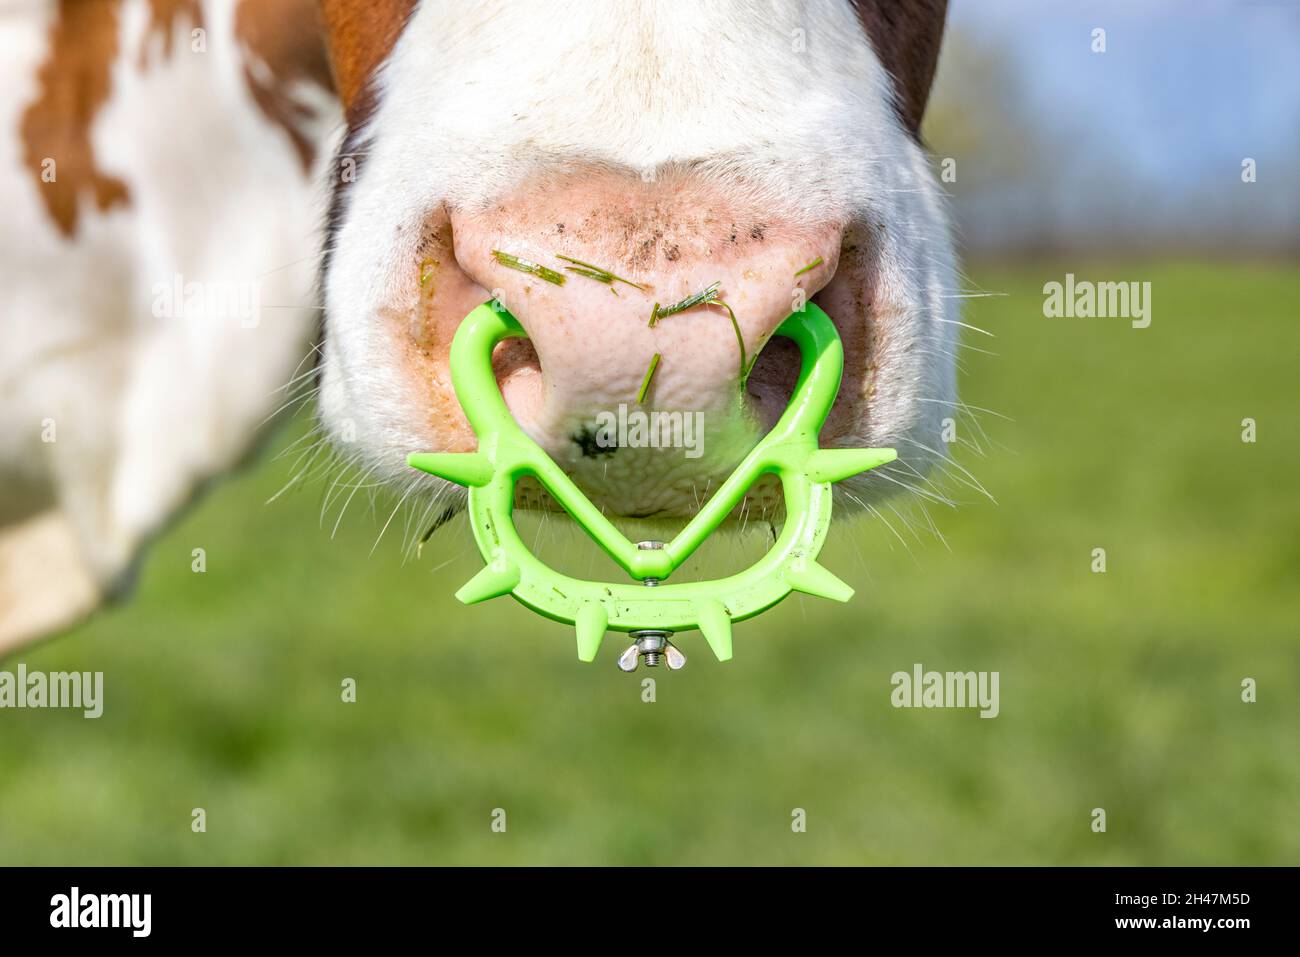 Pink nose of a cow with spiked nose ring, a maverick calf weaning ring of bright green yellow plastic. Stock Photo